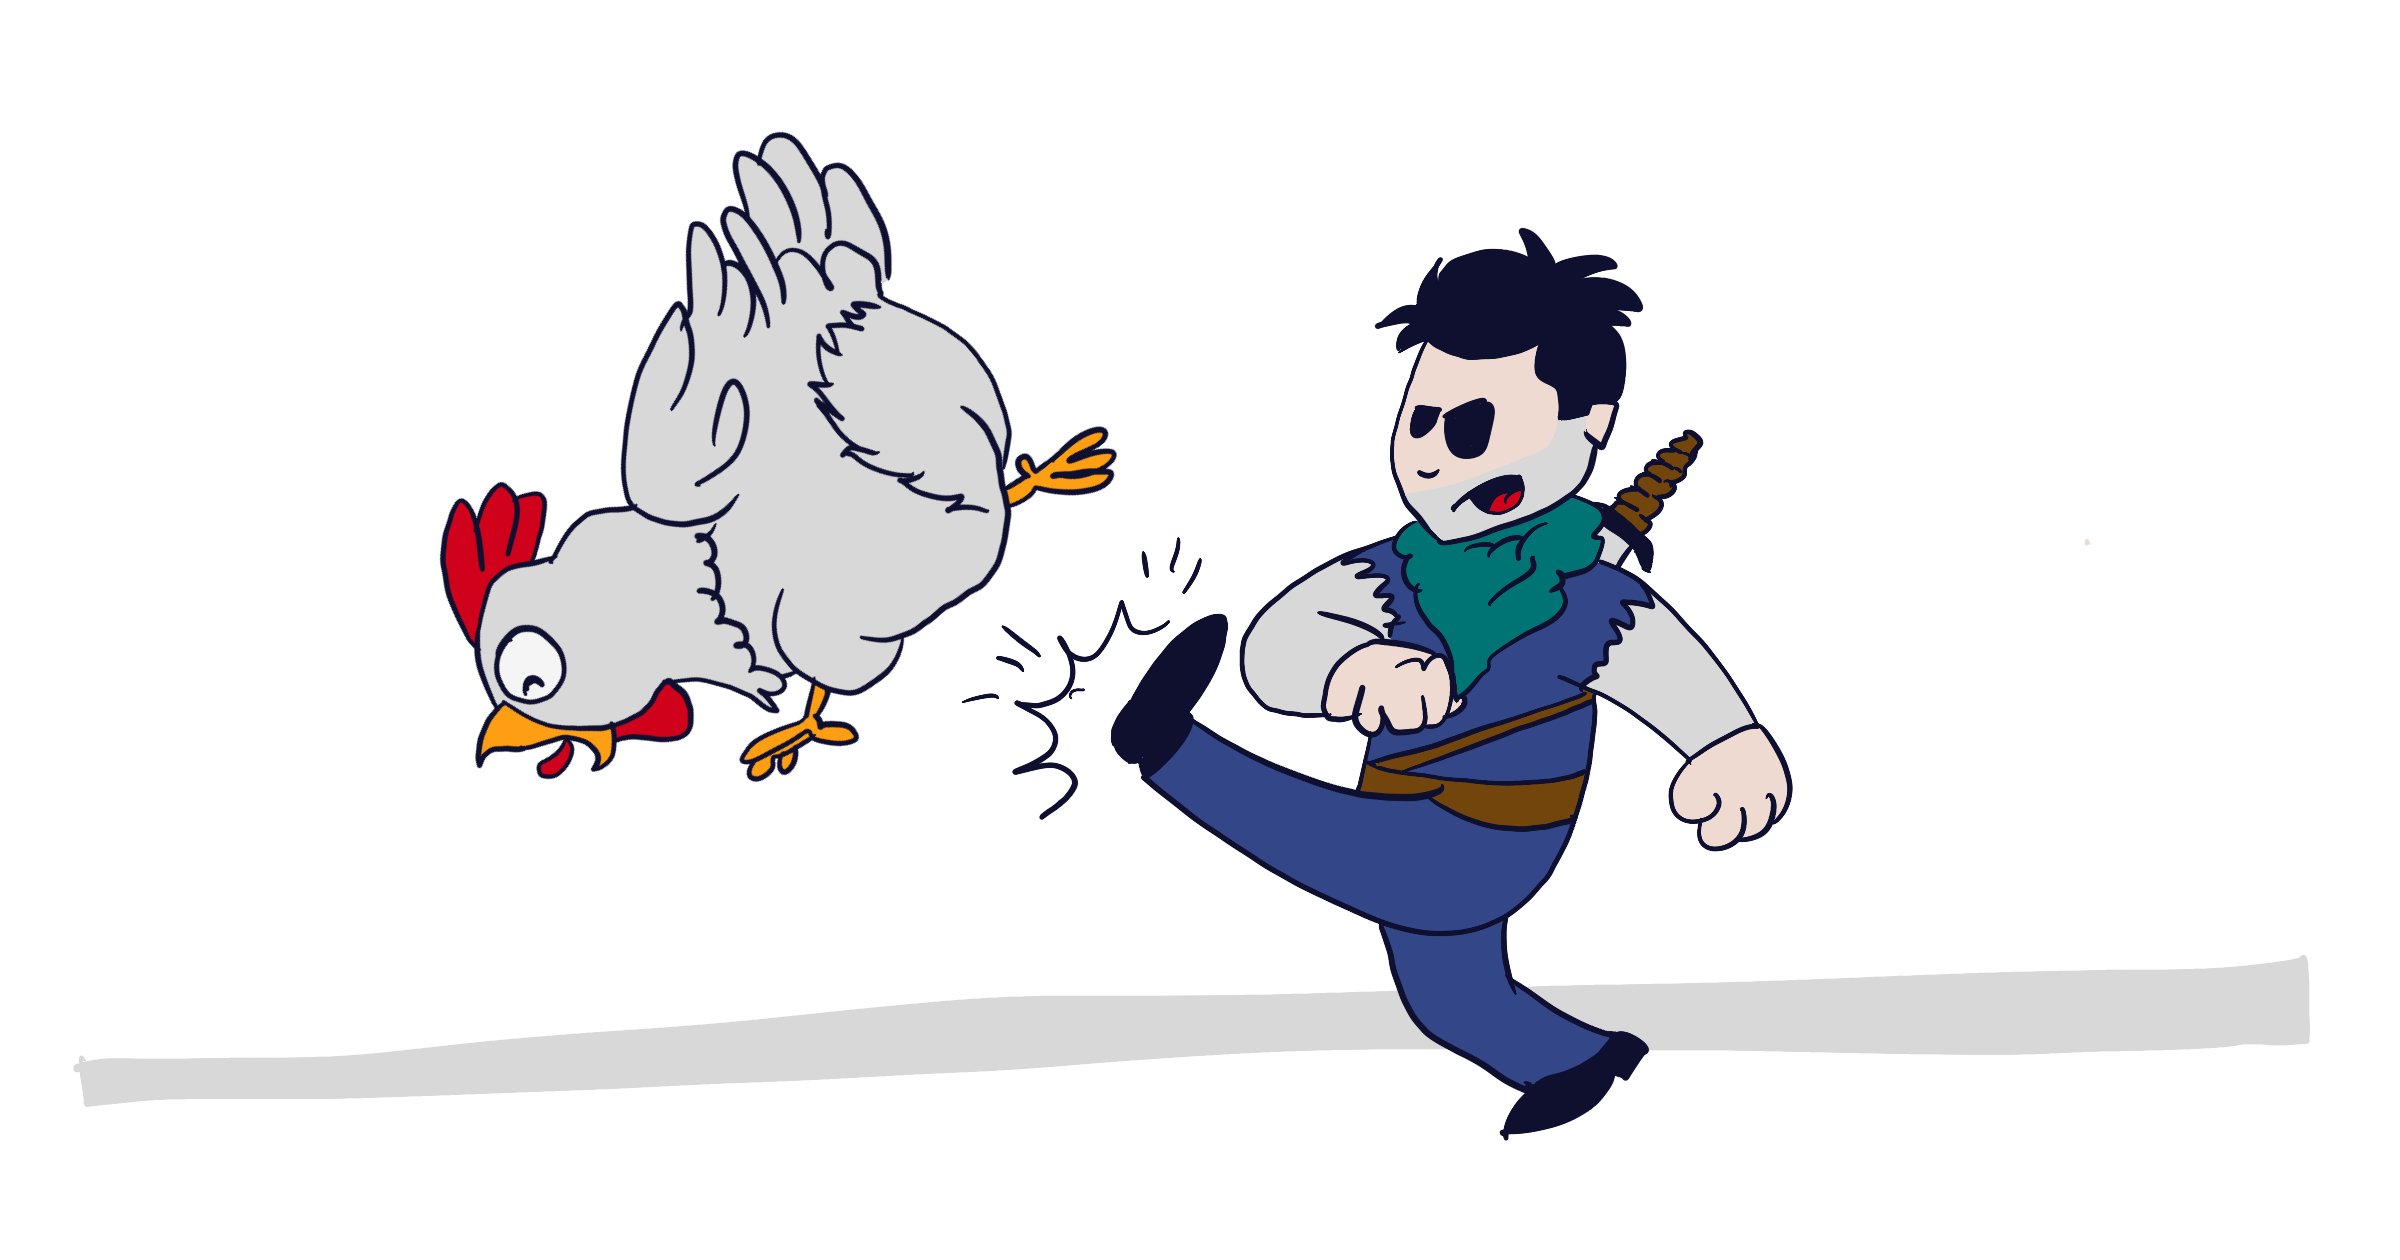 Carlos Eriksson drawn as a cartoon version of the Fable character kicking a chicken.